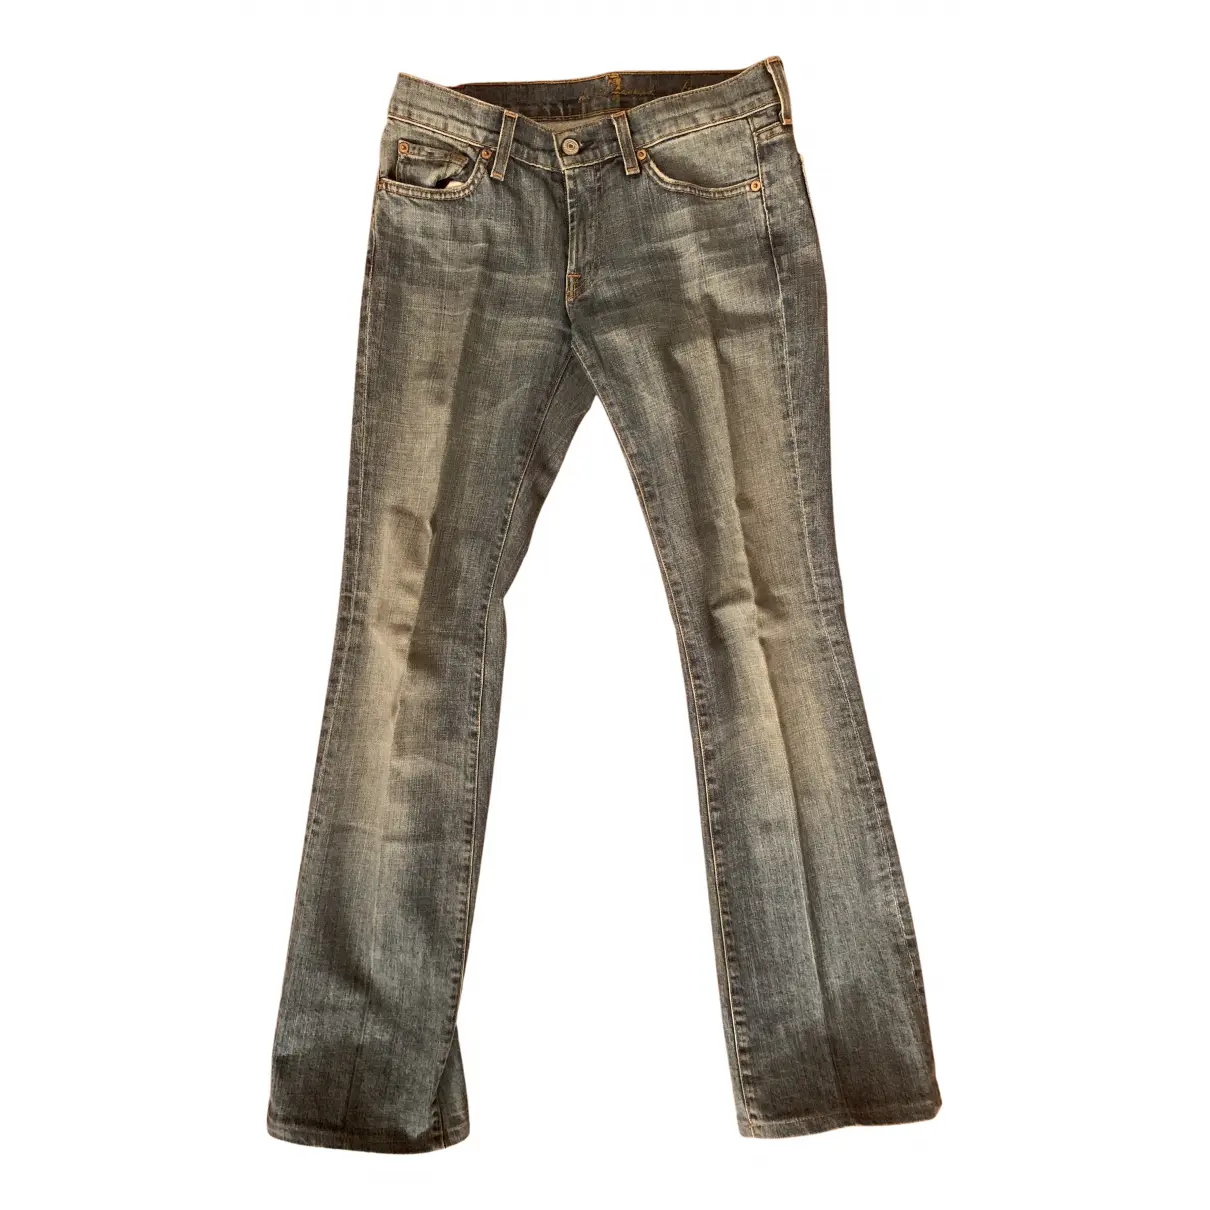 Blue Cotton - elasthane Jeans 7 For All Mankind